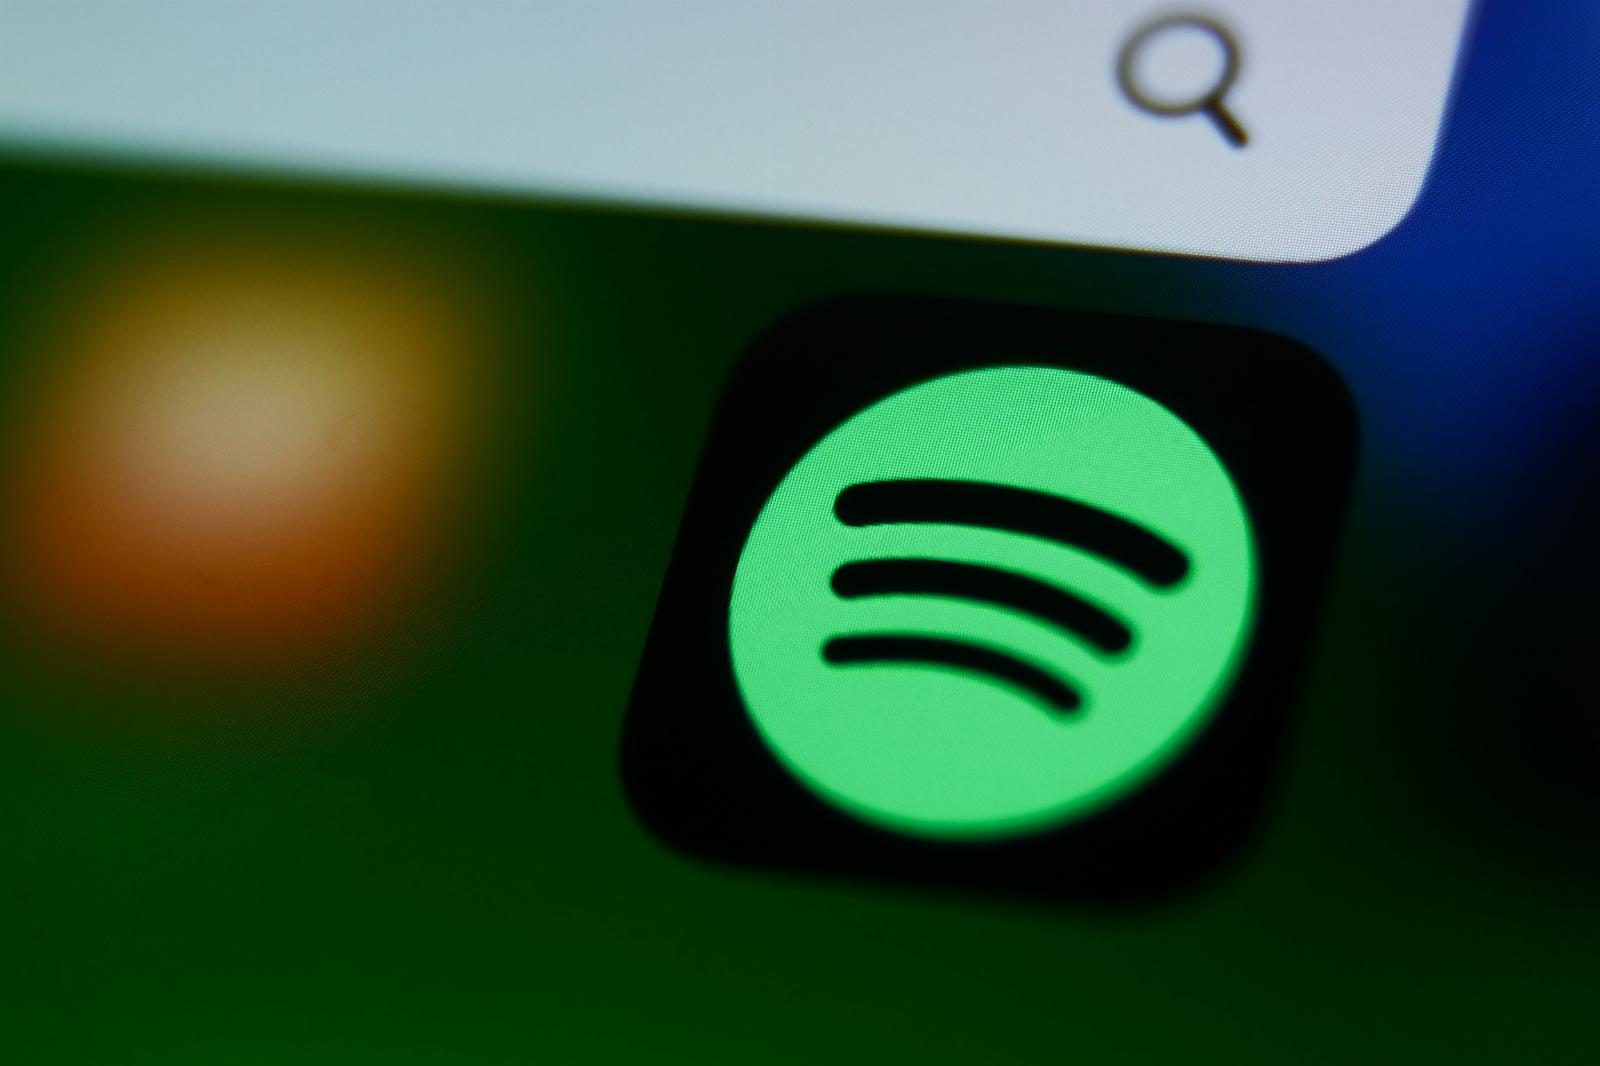 Spotify puts restrictions on its free tier in India to attract more paid users